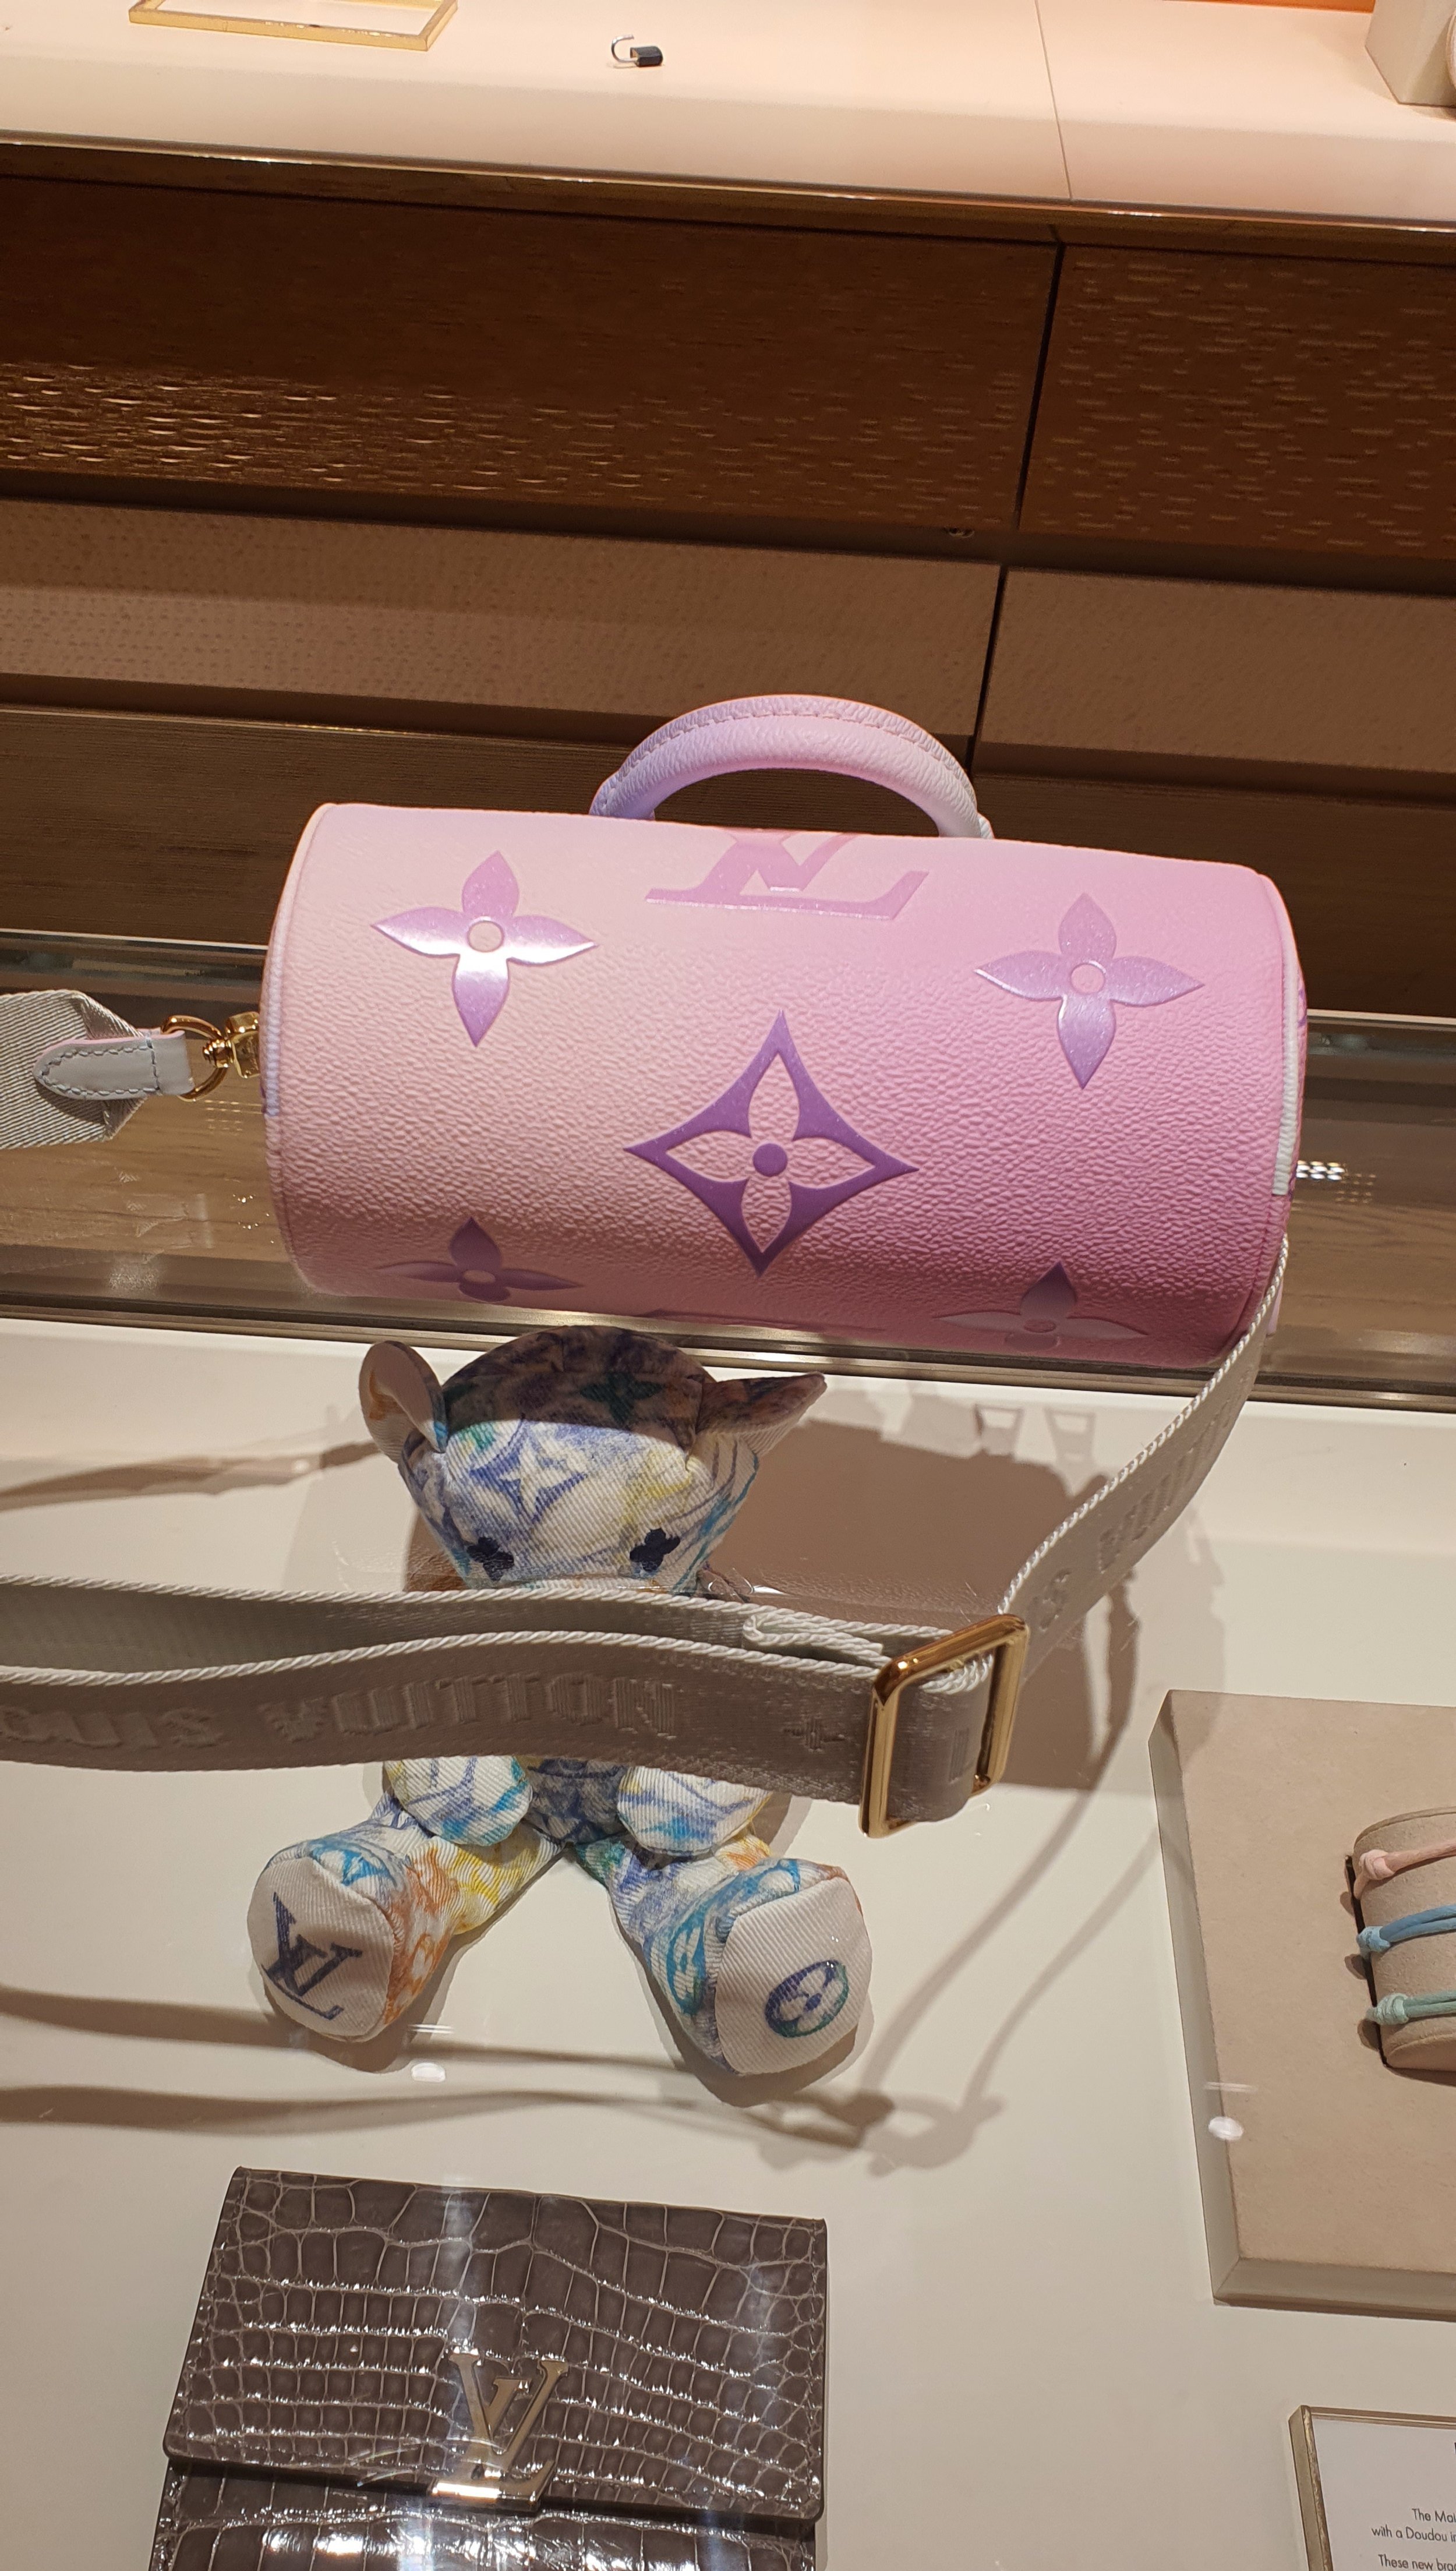 Louis Vuitton Spring/Summer 2022 Pastel Collection Overview